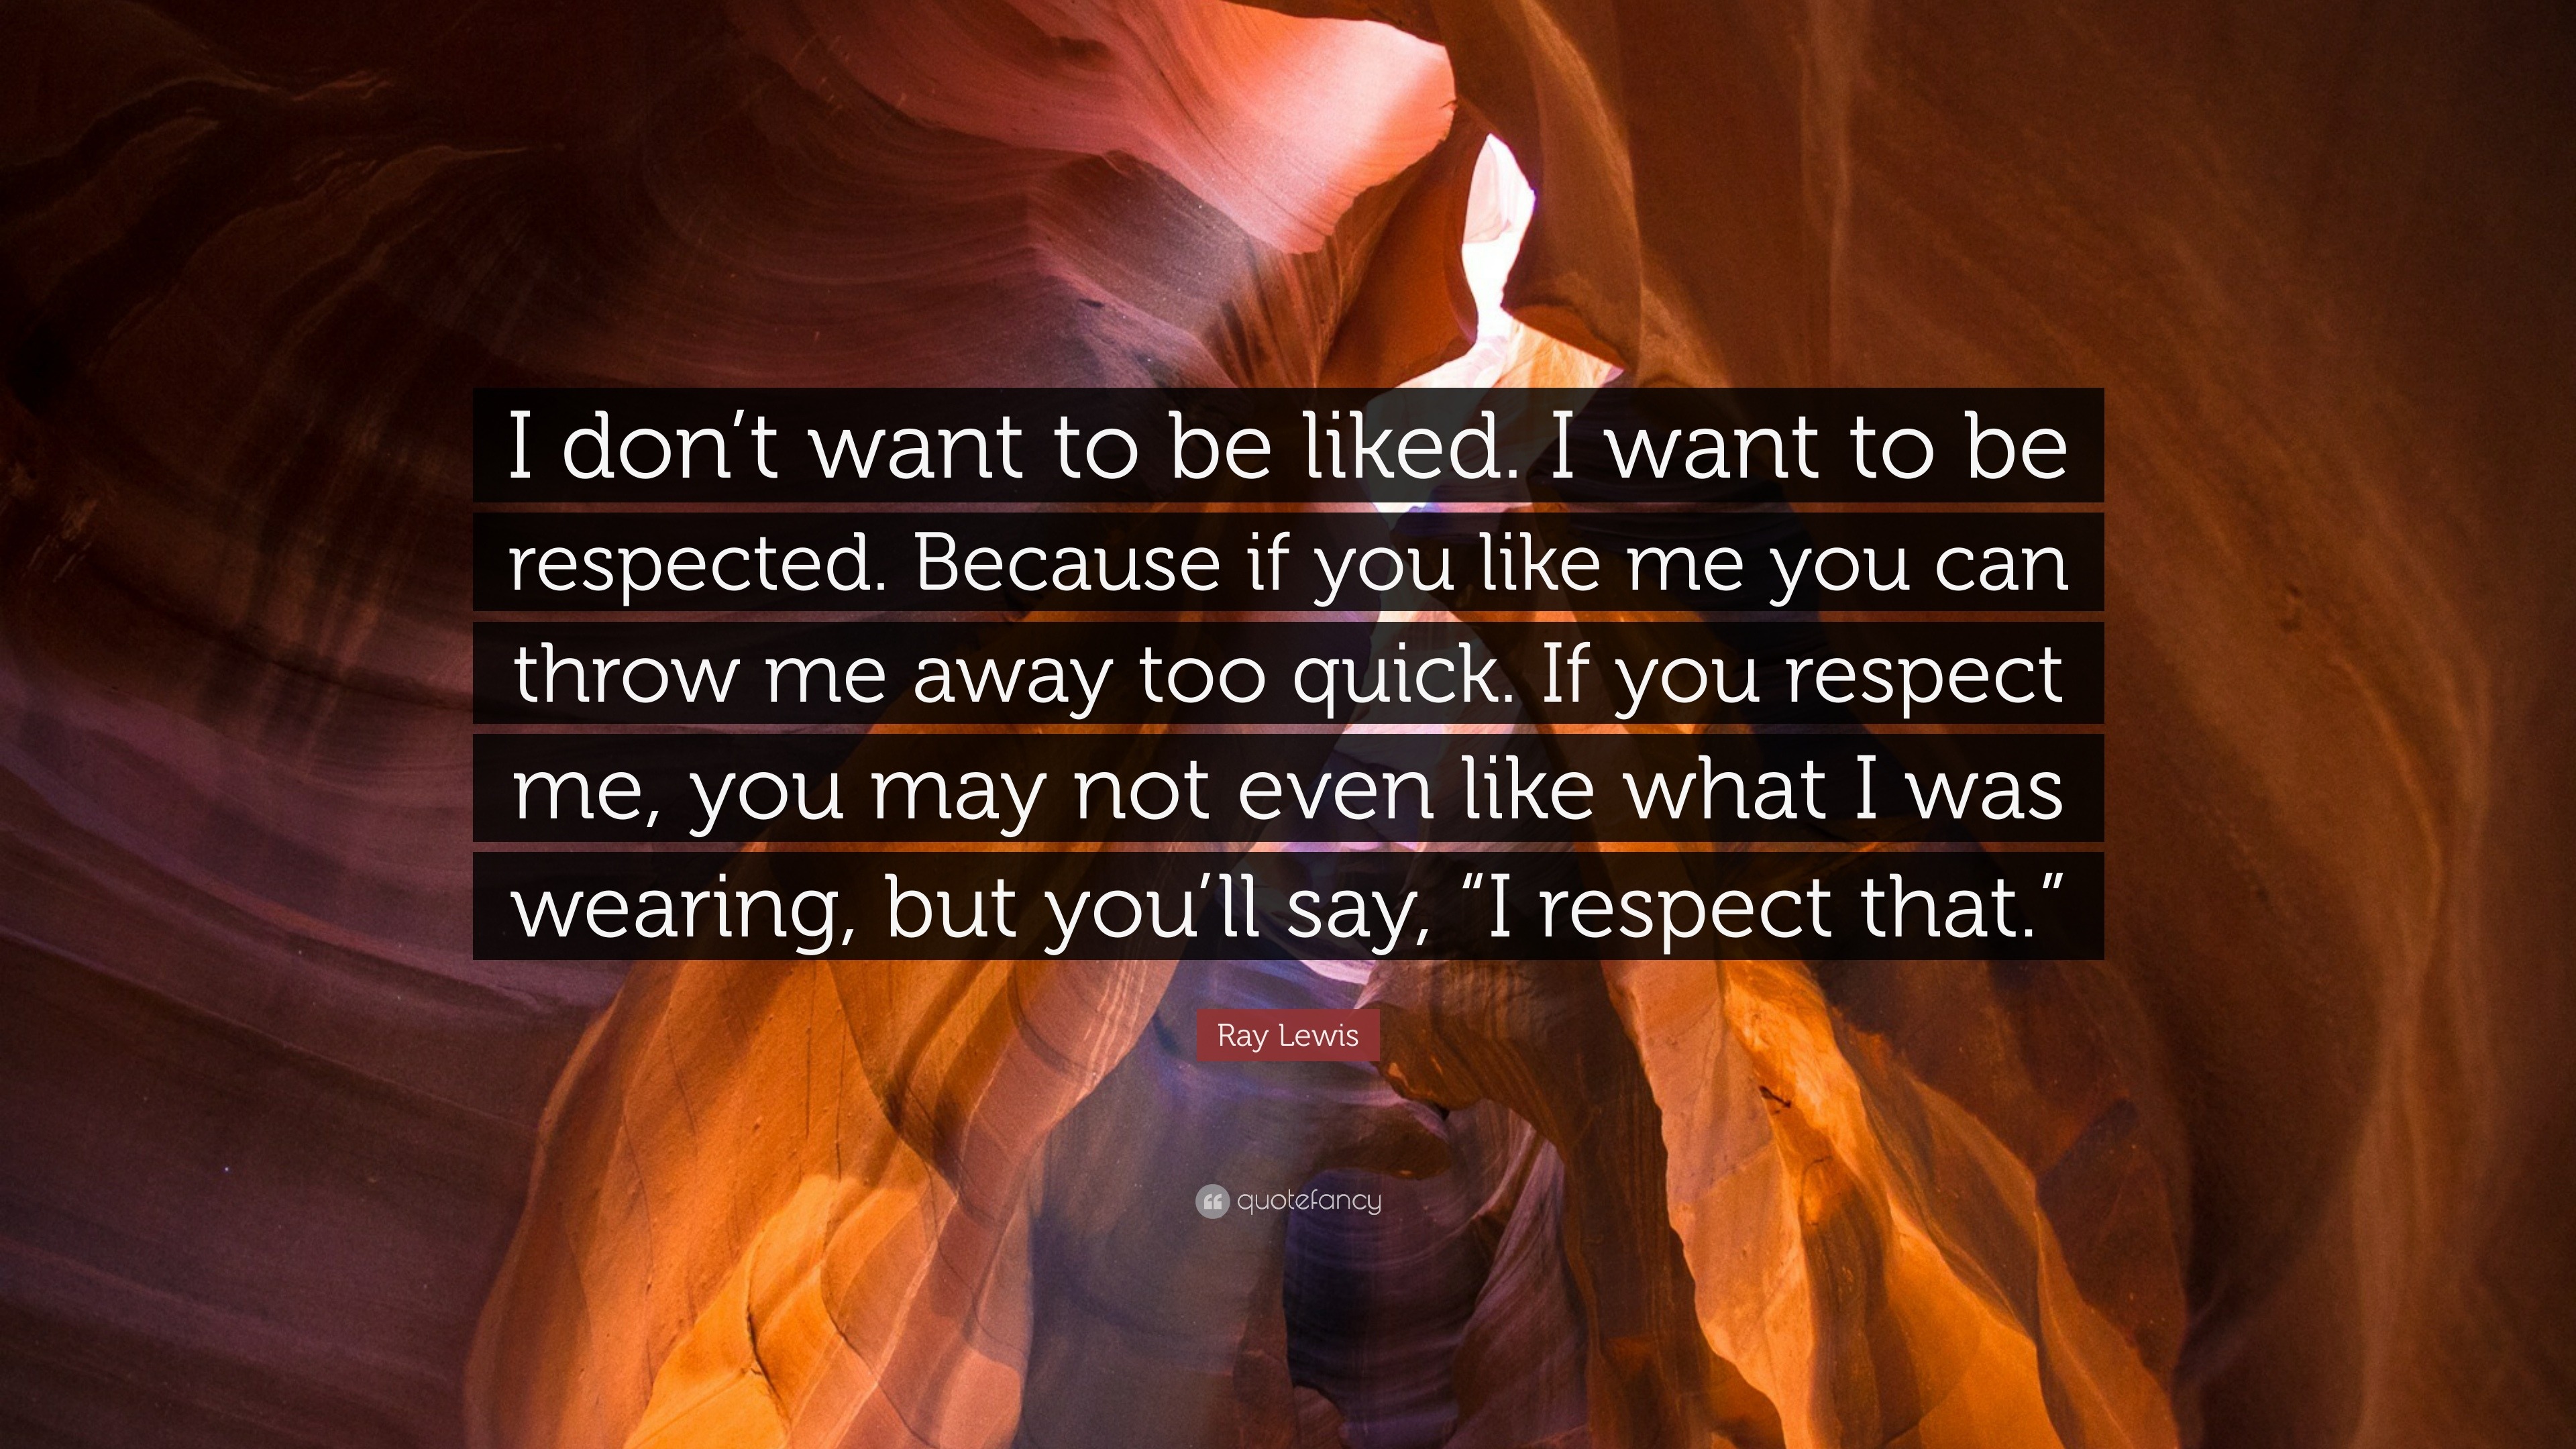 Ray Lewis Quote I Don T Want To Be Liked I Want To Be Respected Because If You Like Me You Can Throw Me Away Too Quick If You Respect